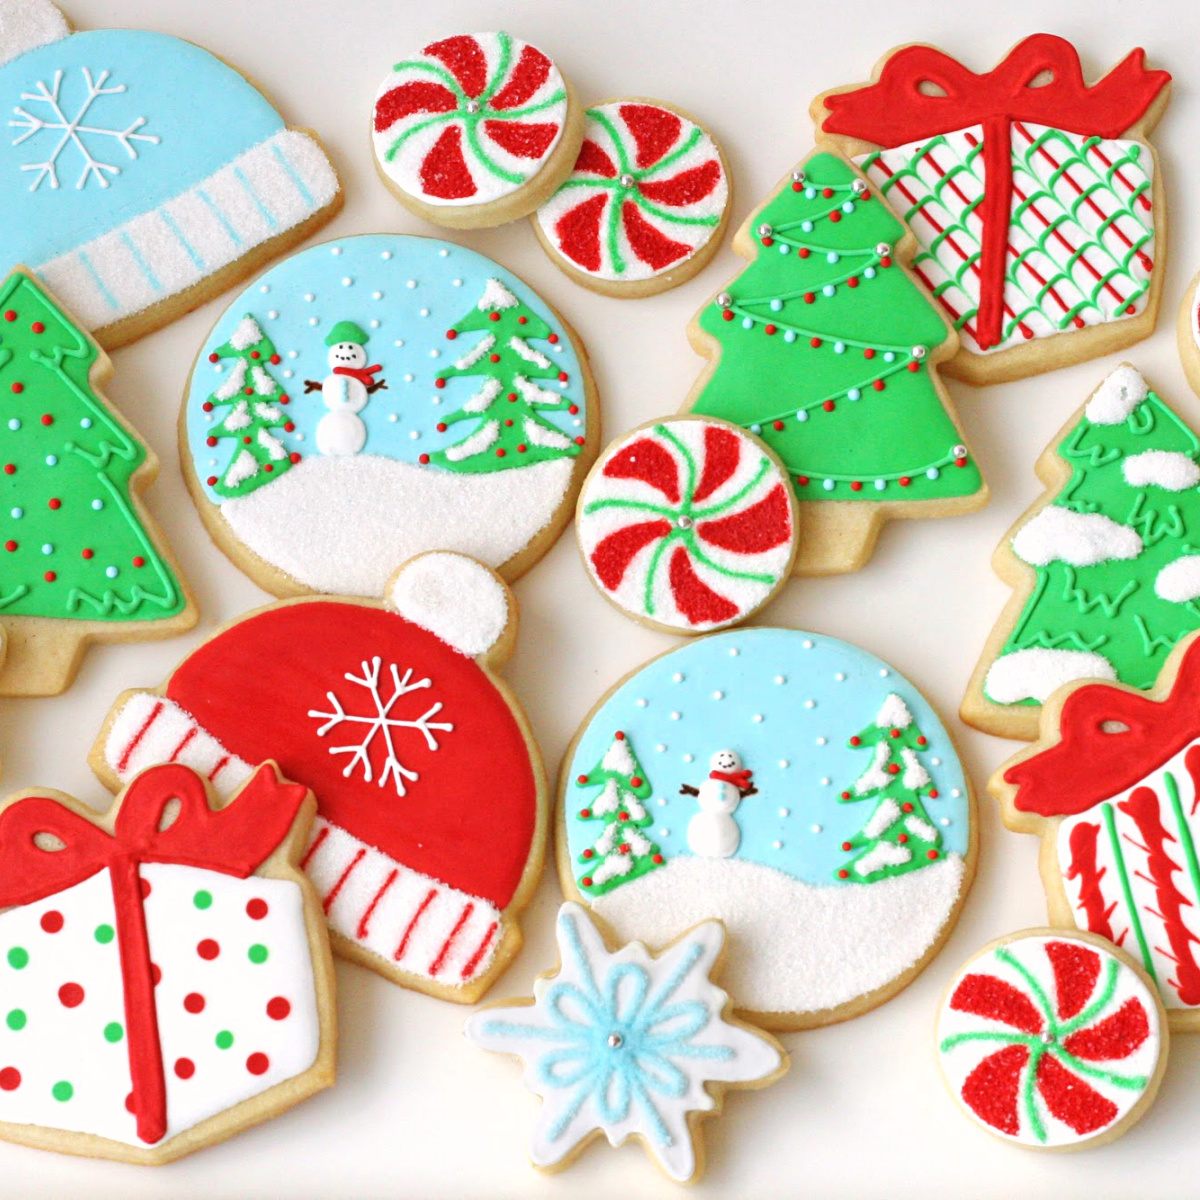 Decorating Sugar Cookies From Start to Finish- Part 2